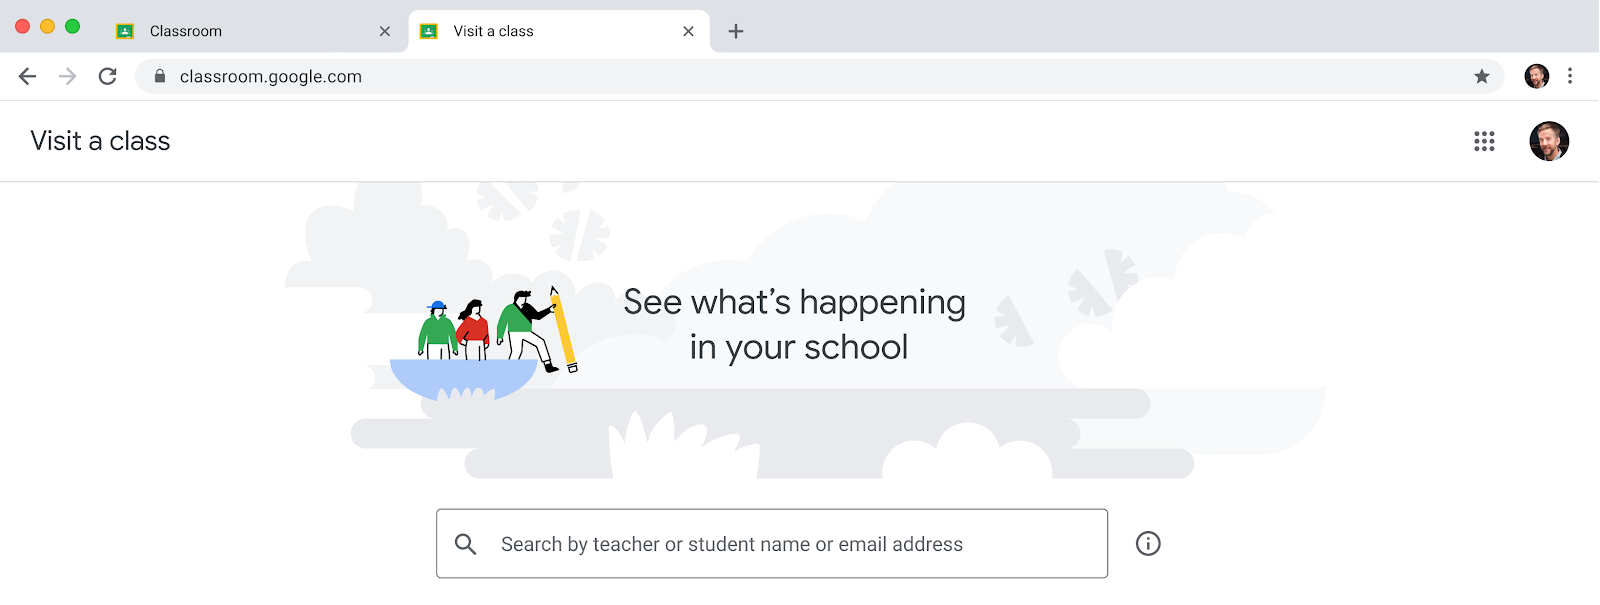 Visit a class using new option in Google Classroom